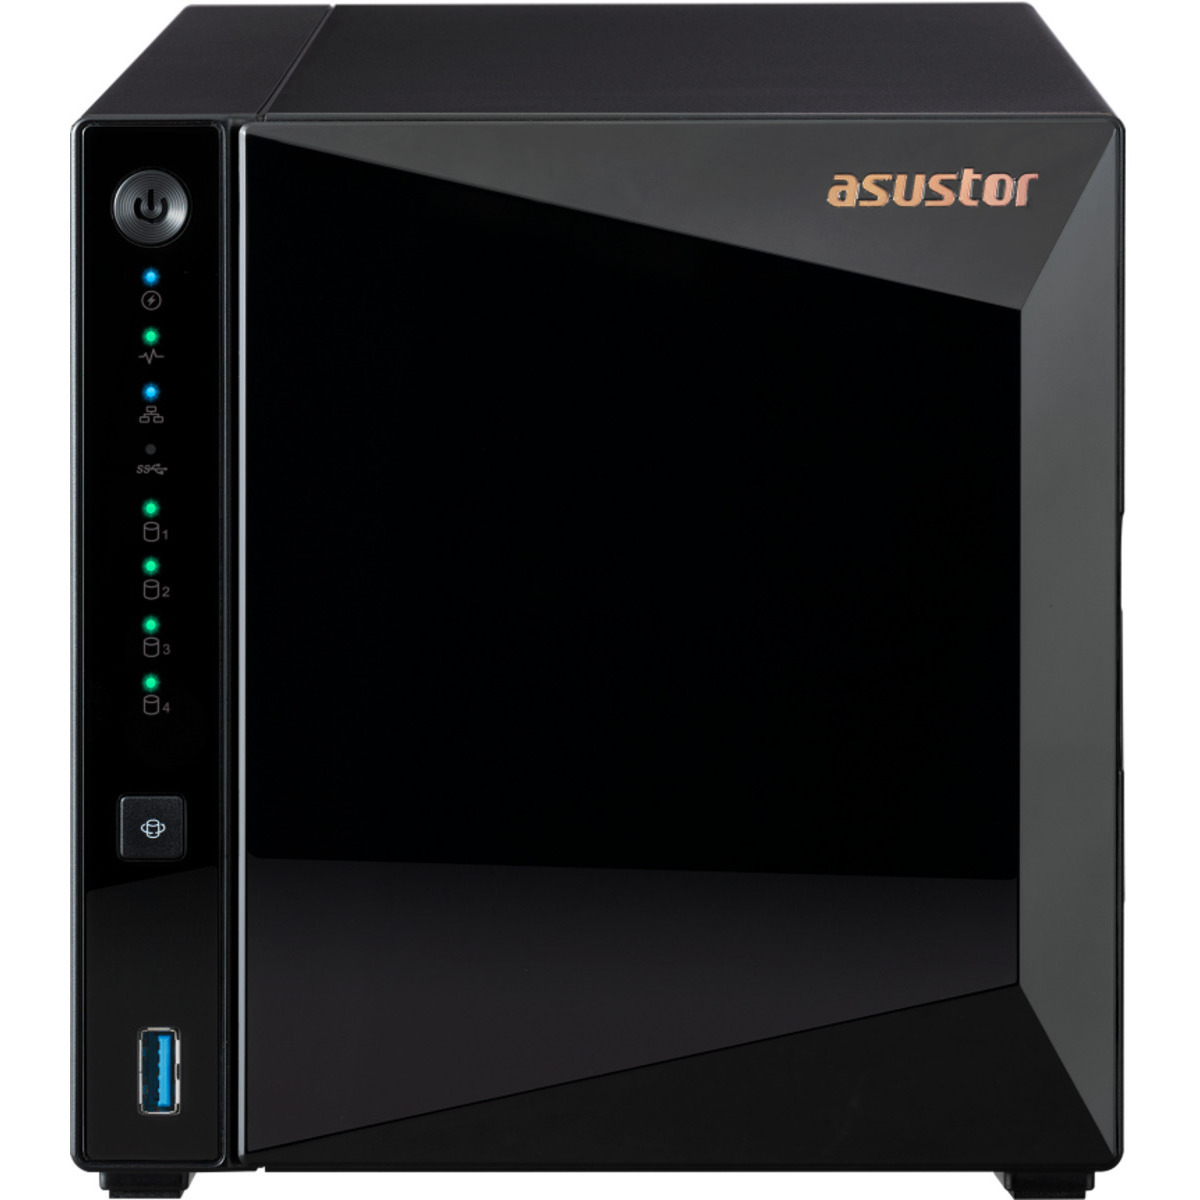 ASUSTOR DRIVESTOR 4 Pro Gen2 AS3304T v2 6tb 4-Bay Desktop Personal / Basic Home / Small Office NAS - Network Attached Storage Device 3x2tb Sandisk Ultra 3D SDSSDH3-2T00 2.5 560/520MB/s SATA 6Gb/s SSD CONSUMER Class Drives Installed - Burn-In Tested - ON SALE DRIVESTOR 4 Pro Gen2 AS3304T v2